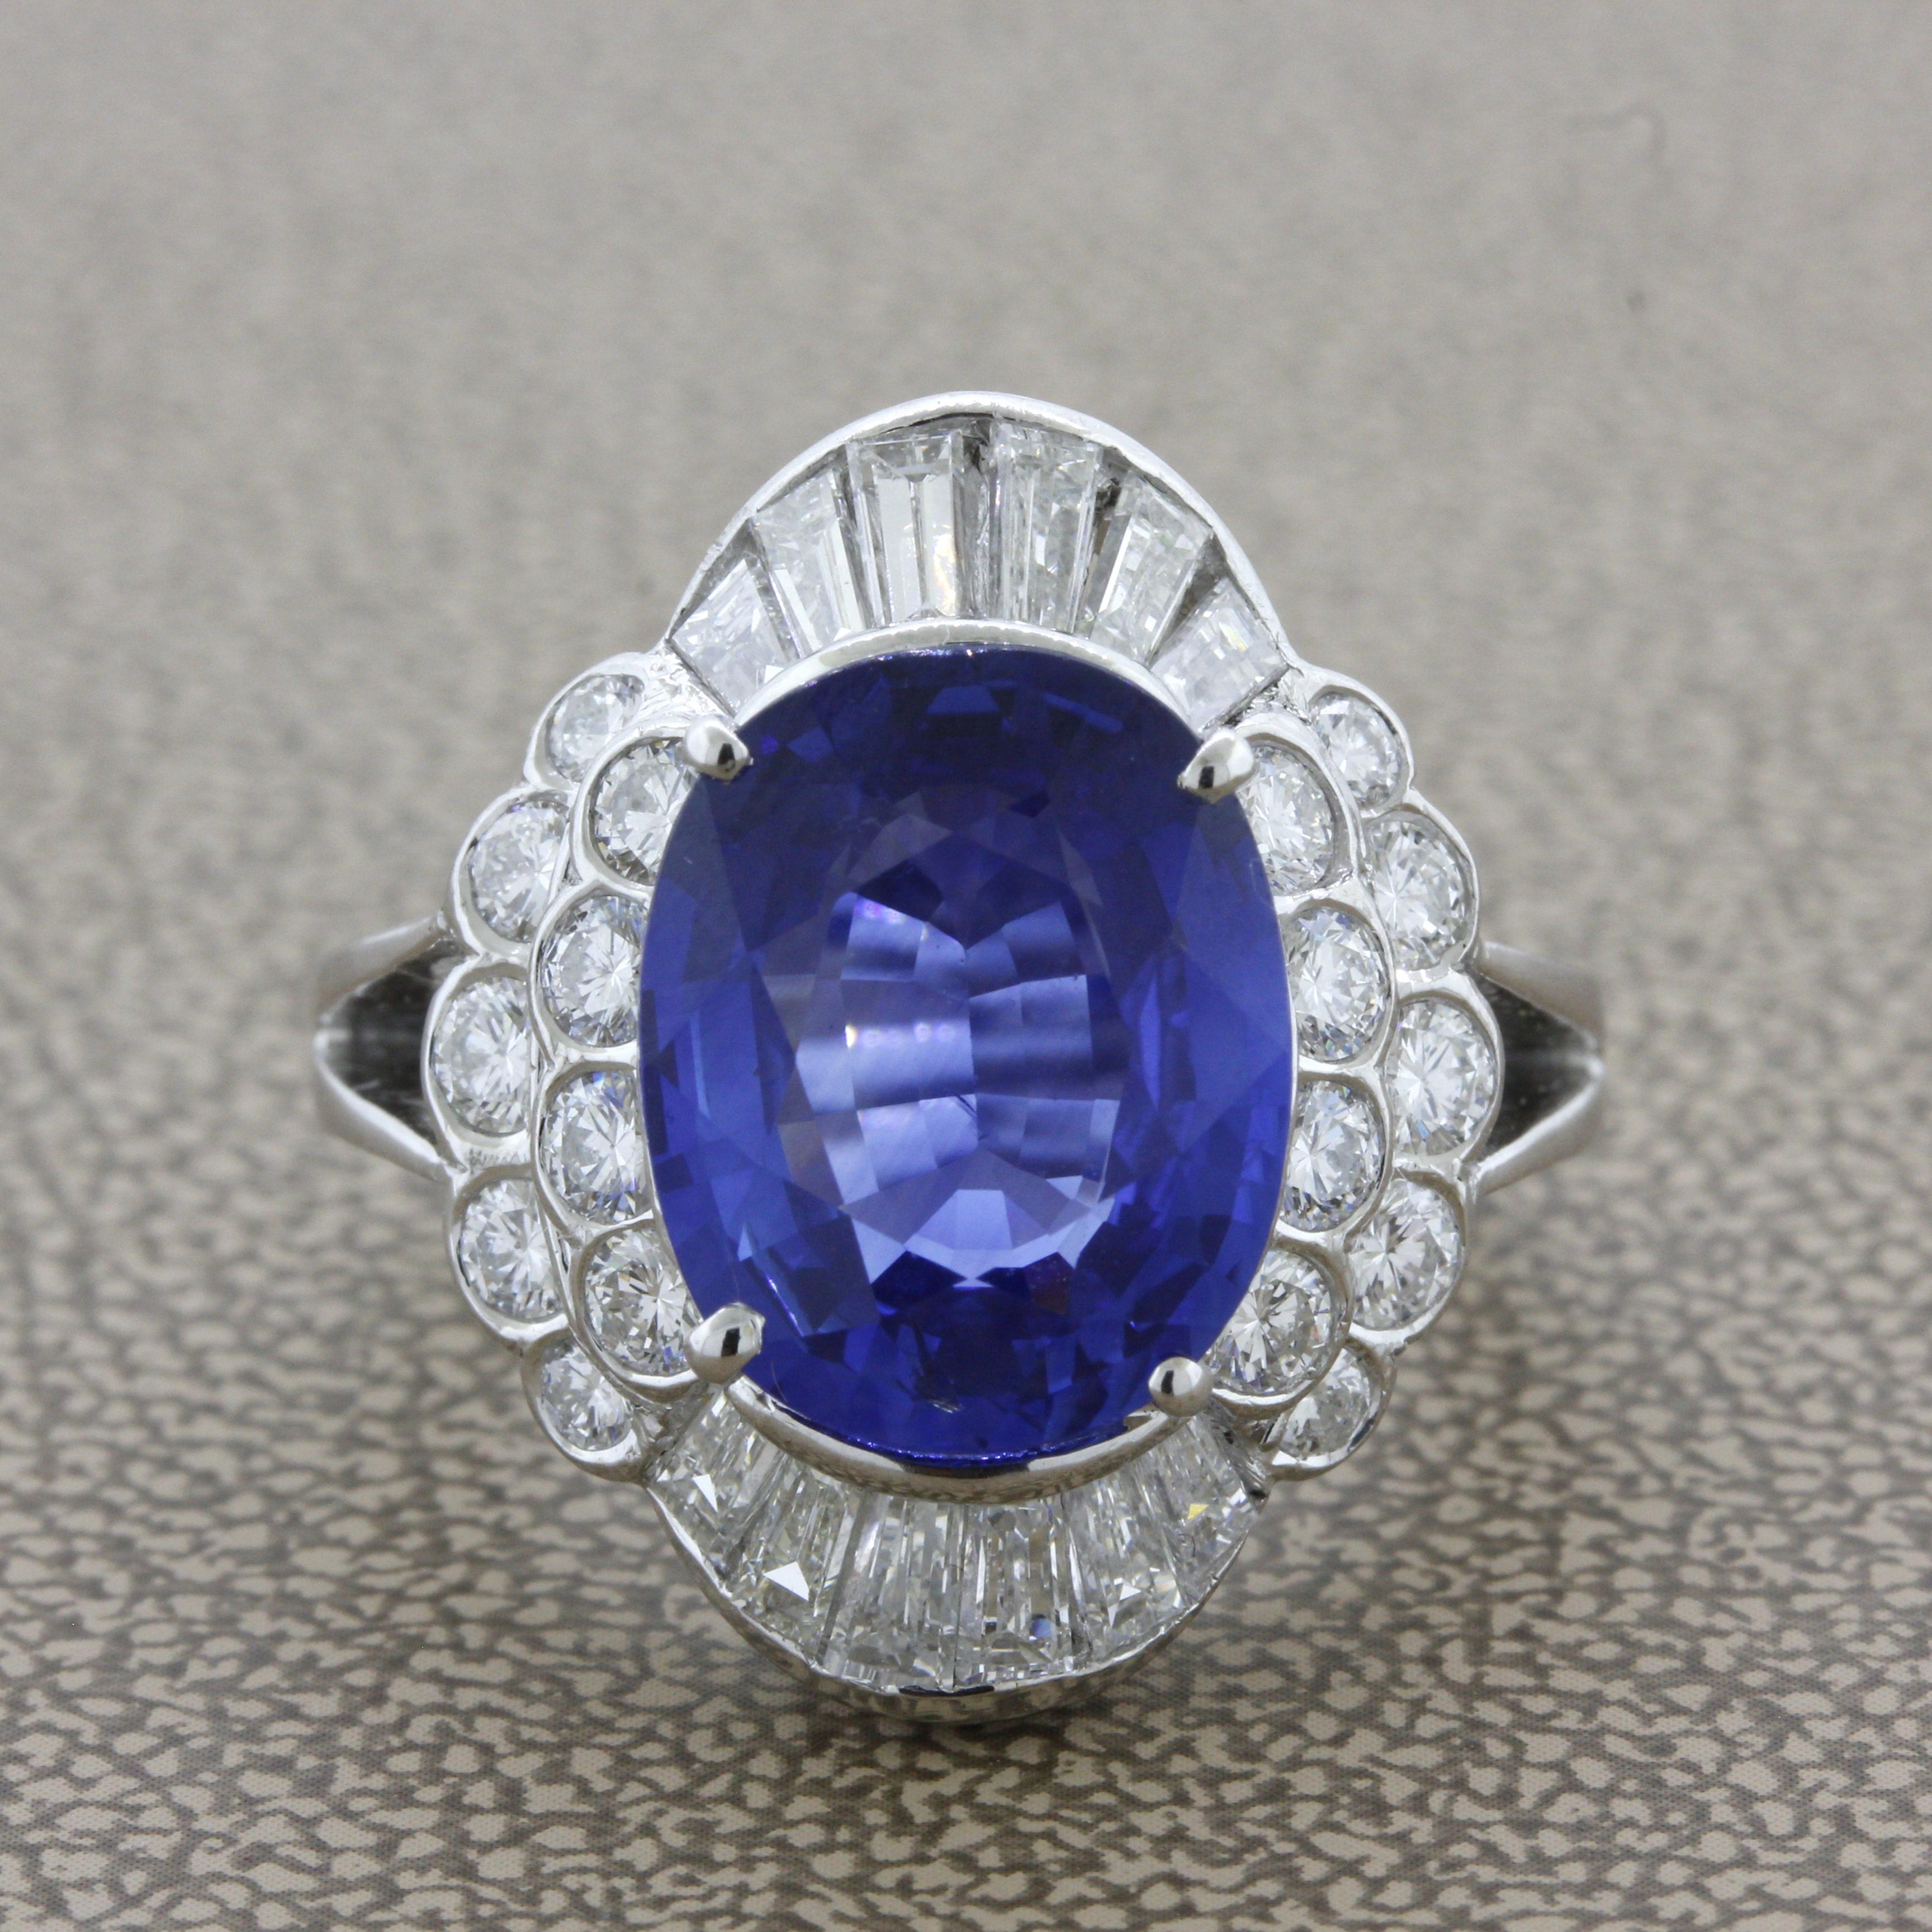 A stunning sapphire weighing an impressive 6.47 carats takes center stage of this diamond gold ring. It has a open vivid blue color which is bright and brilliant. Adding to that, I has been certified by the GIA as natural and coming from Ceylon (Sri